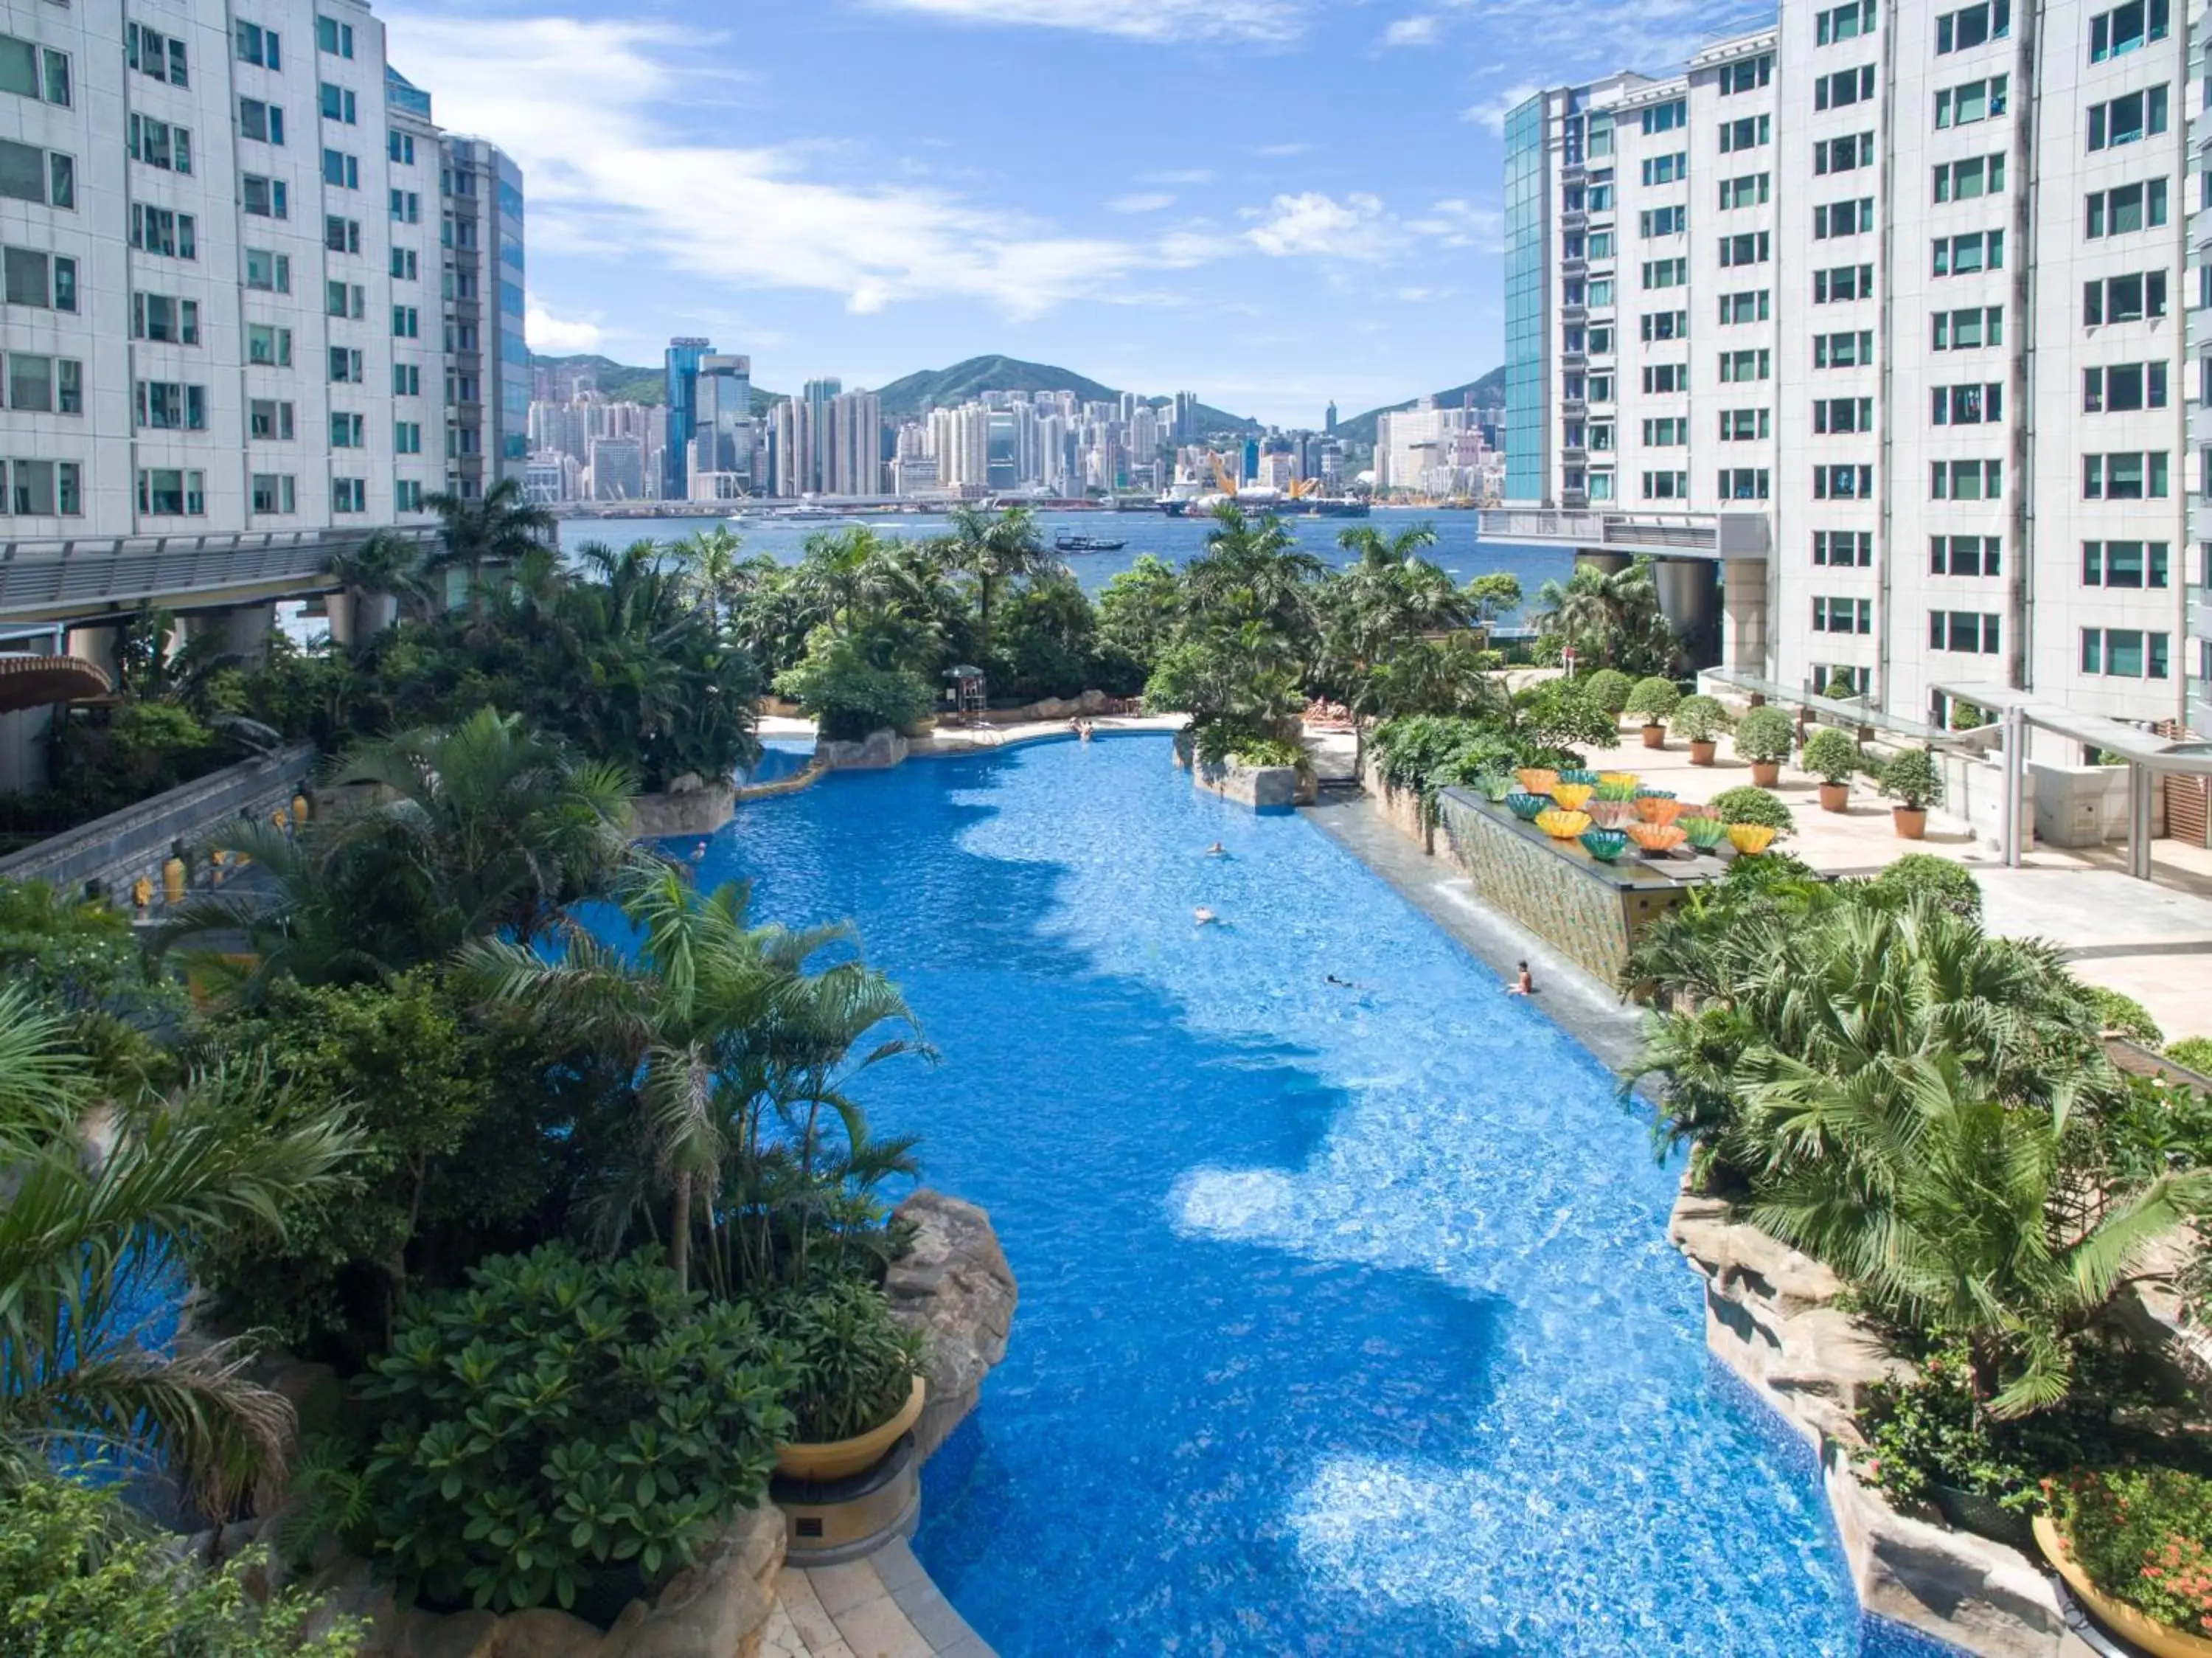 Sea view, Pool View in Kowloon Harbourfront Hotel